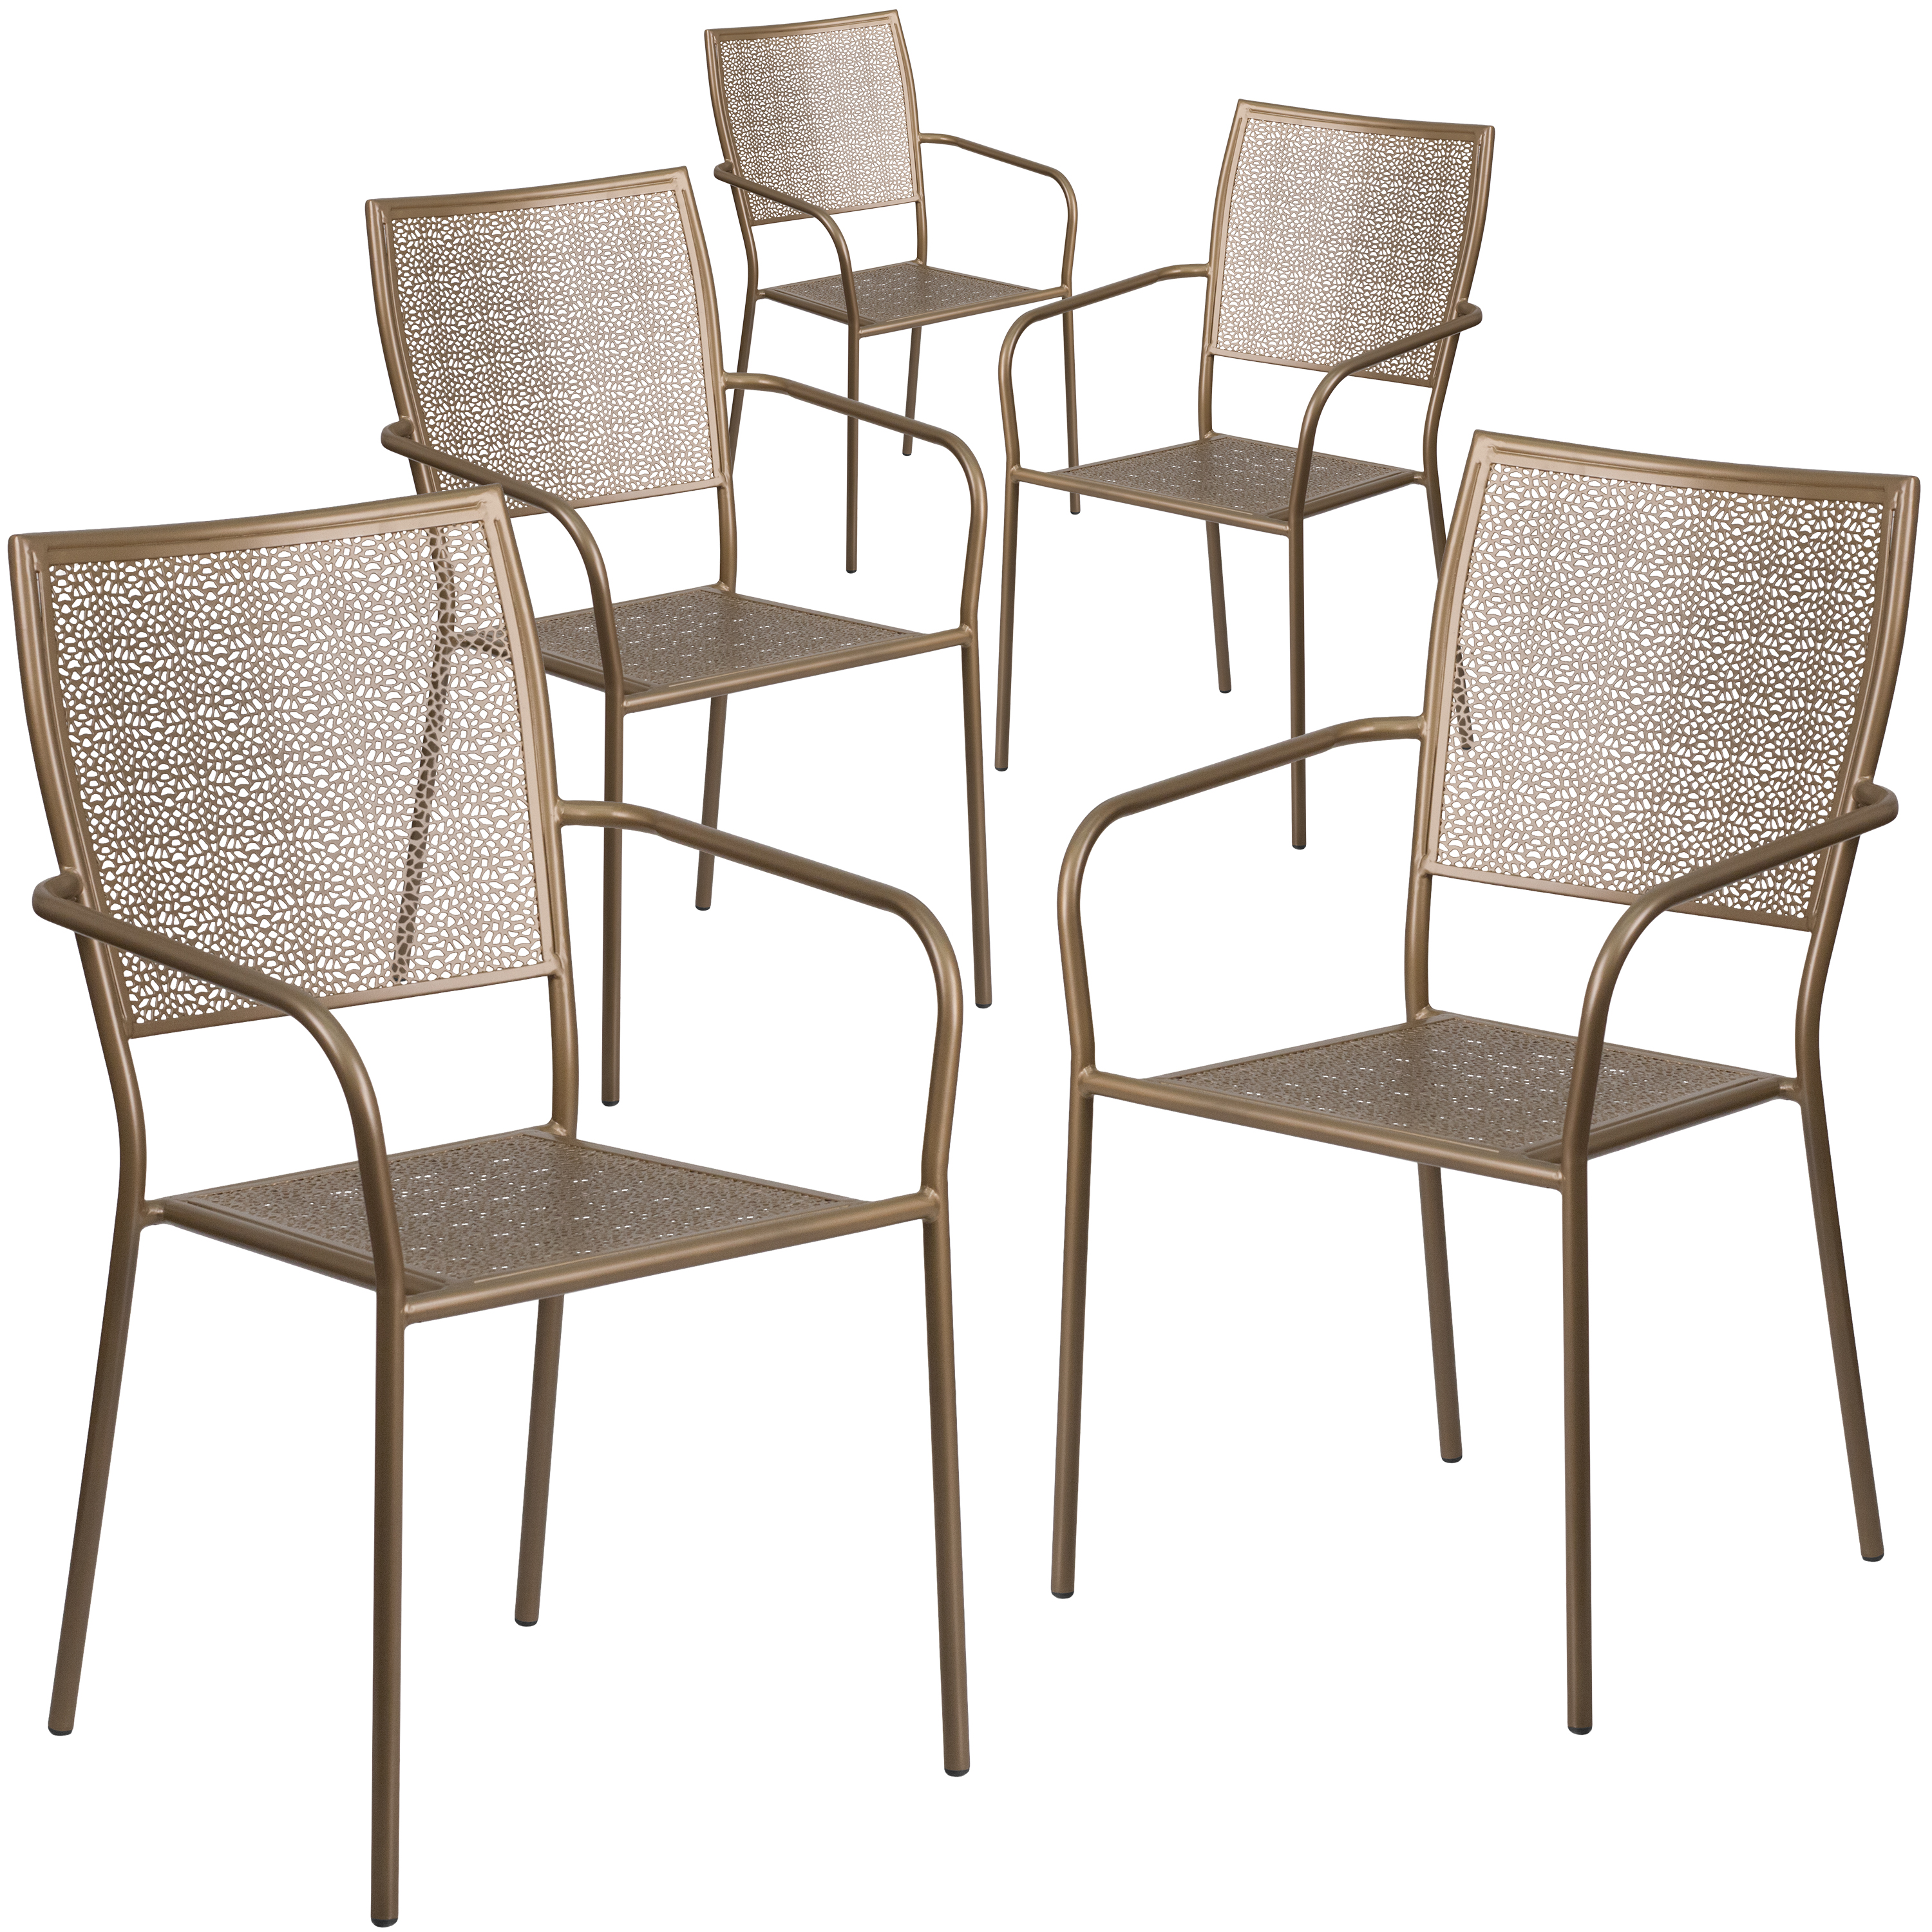 Flash Furniture Oia Commercial Grade 5 Pack Gold Indoor-Outdoor Steel Patio Arm Chair with Square Back - image 1 of 2